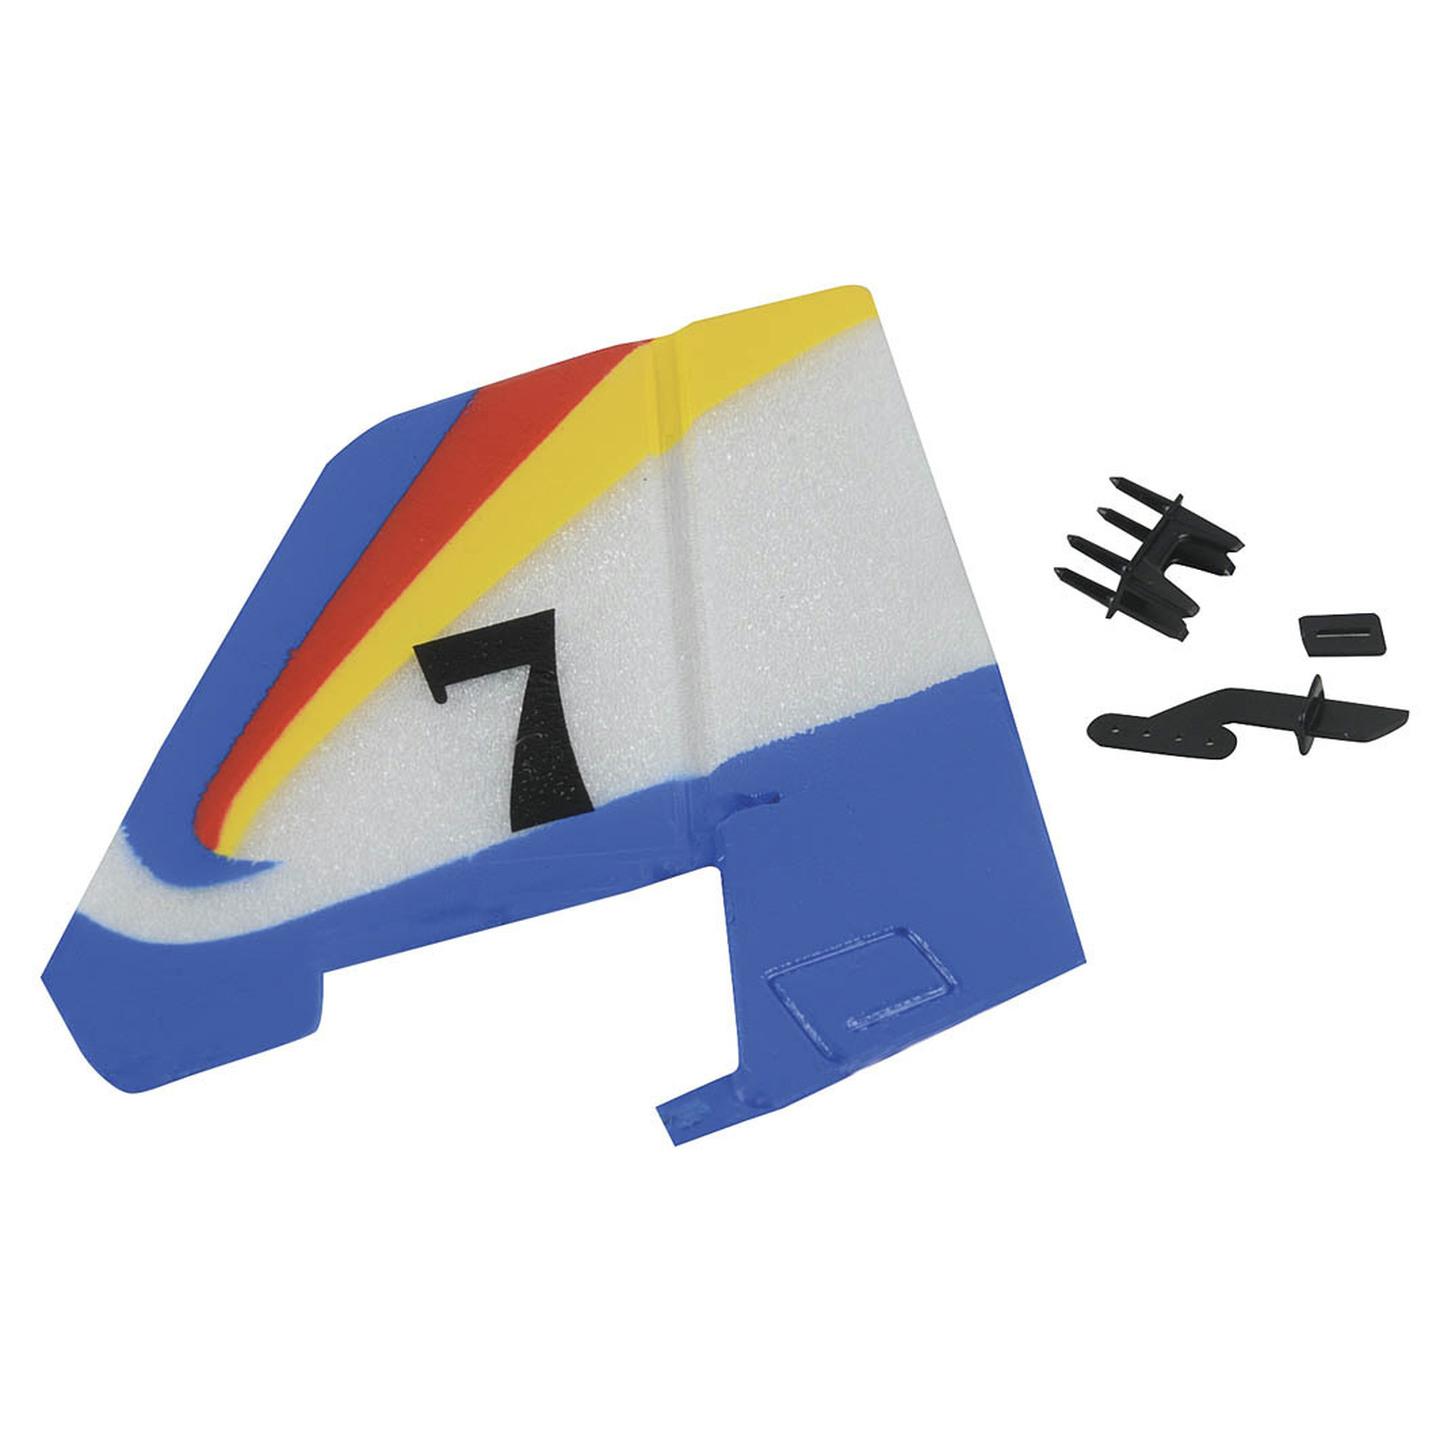 Vertical Tail Rudder Angle Kit to suit GT-4050 RC Plane